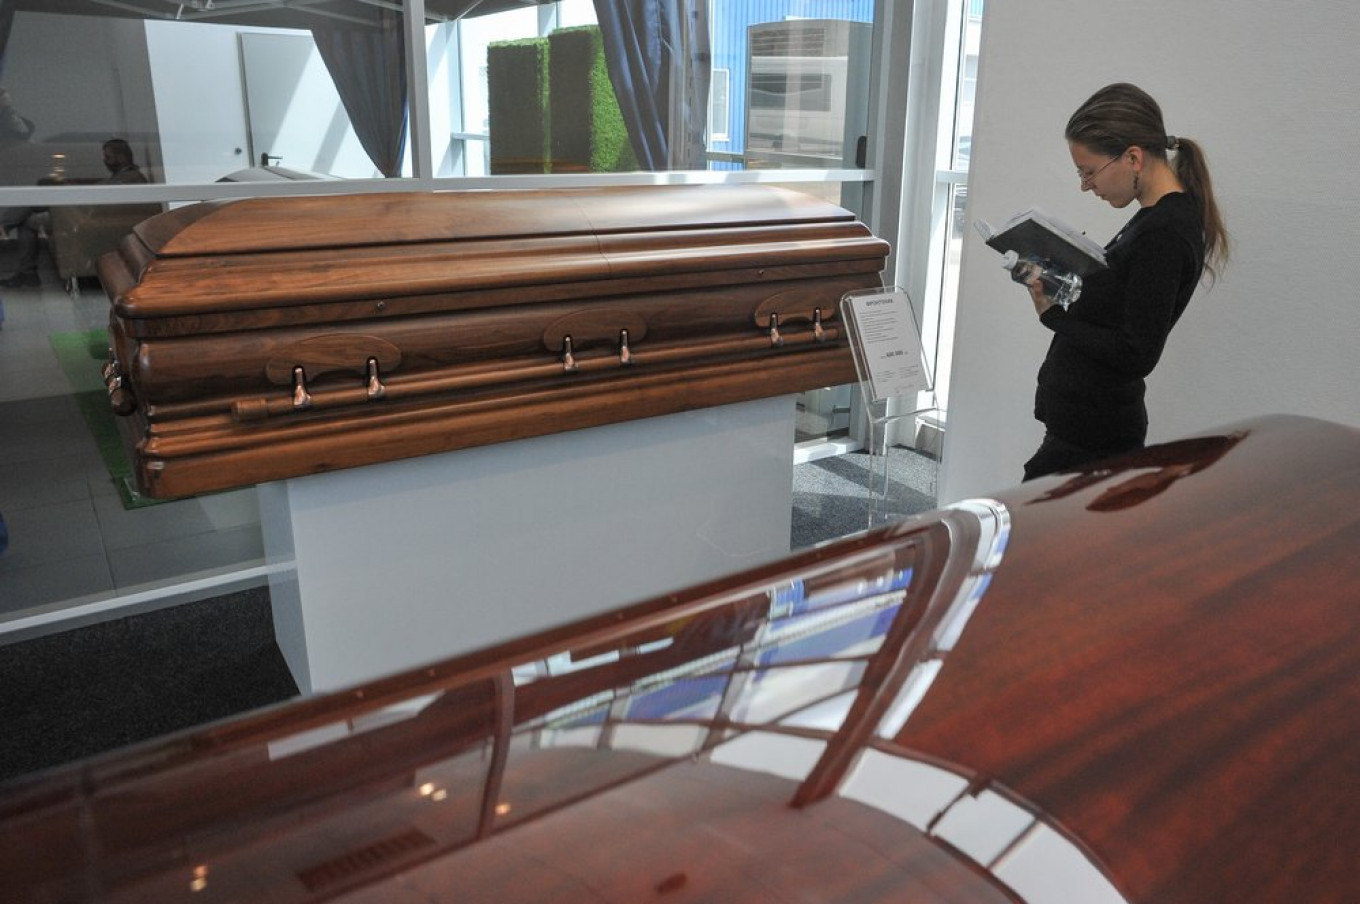 Russian City Launches Online Funeral Broadcasts to Prevent Coronavirus Spread